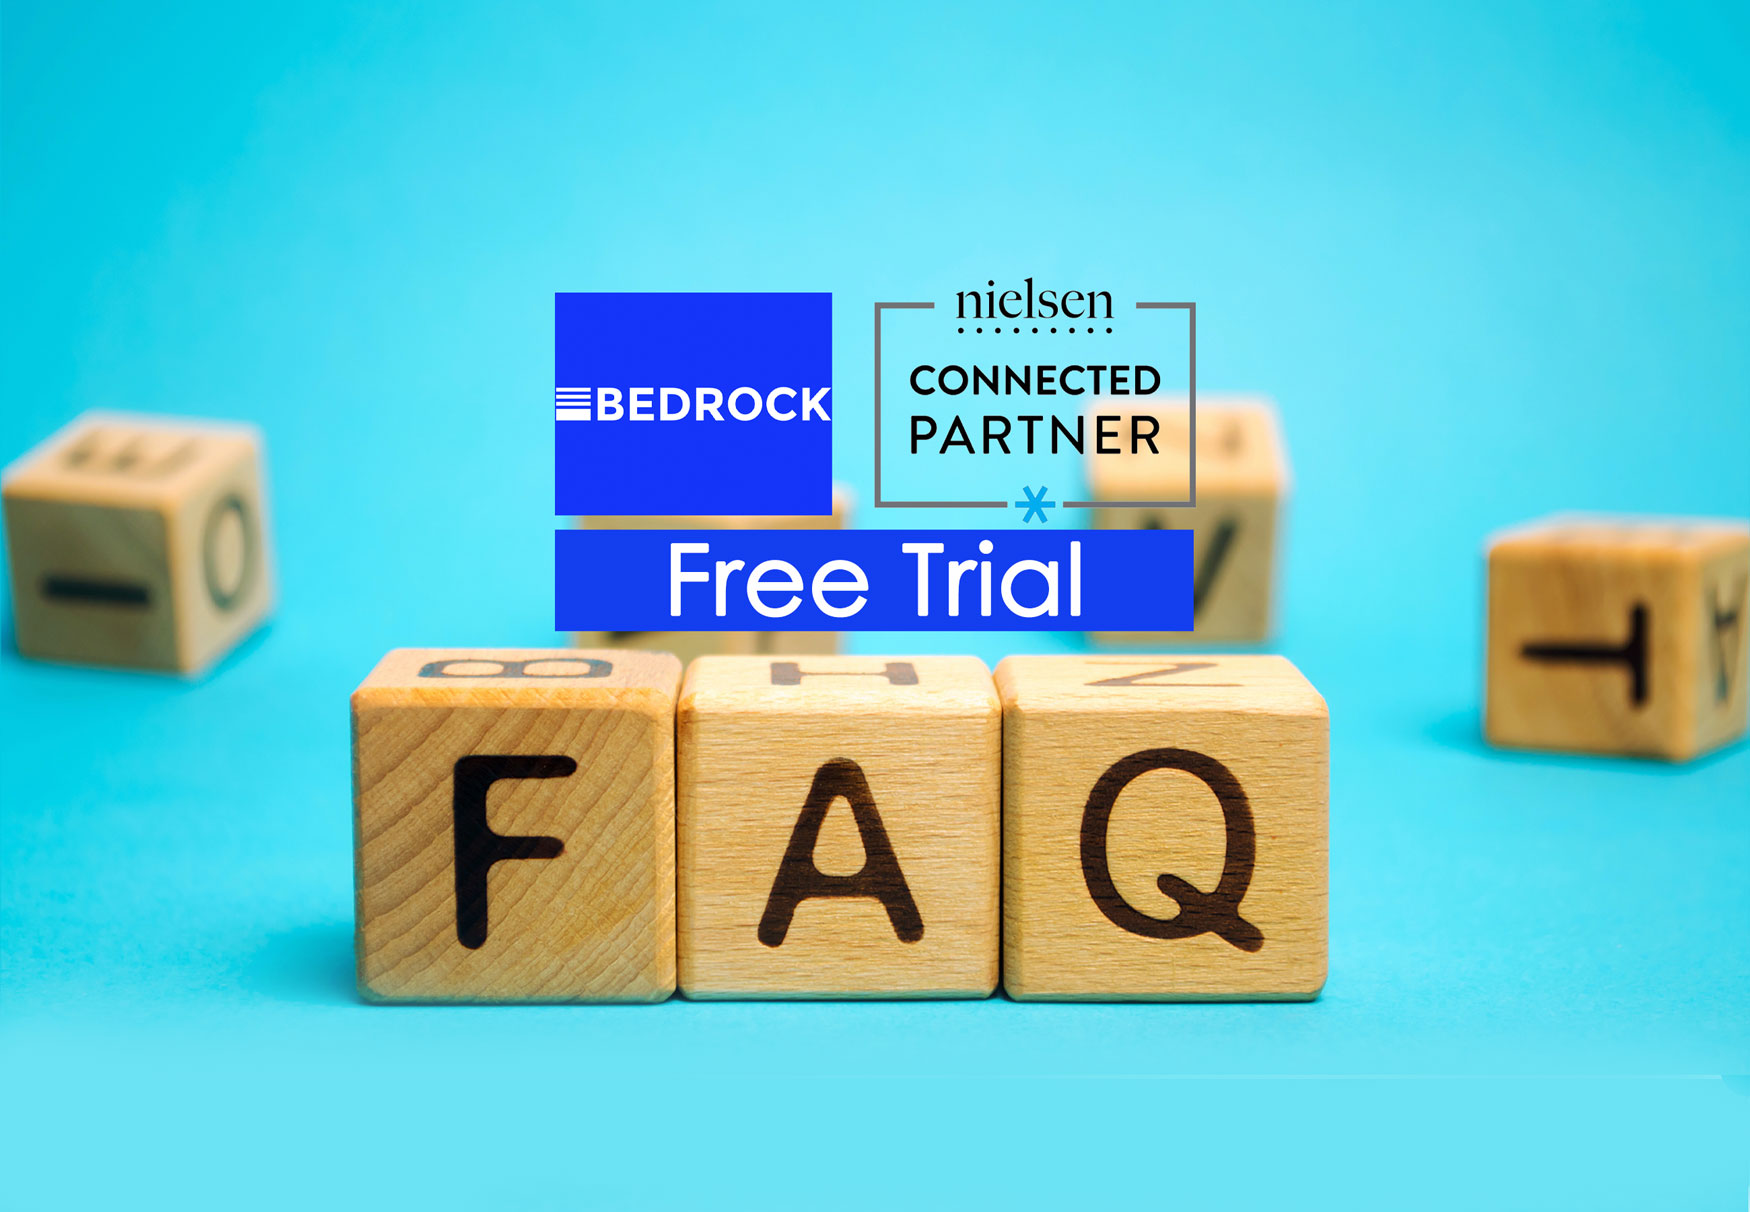 The Bedrock Free Trial is backed by a huge archive dataset from Nielsen. What does that mean for CPGs who want to try it out? Here are some Frequently Asked Questions...